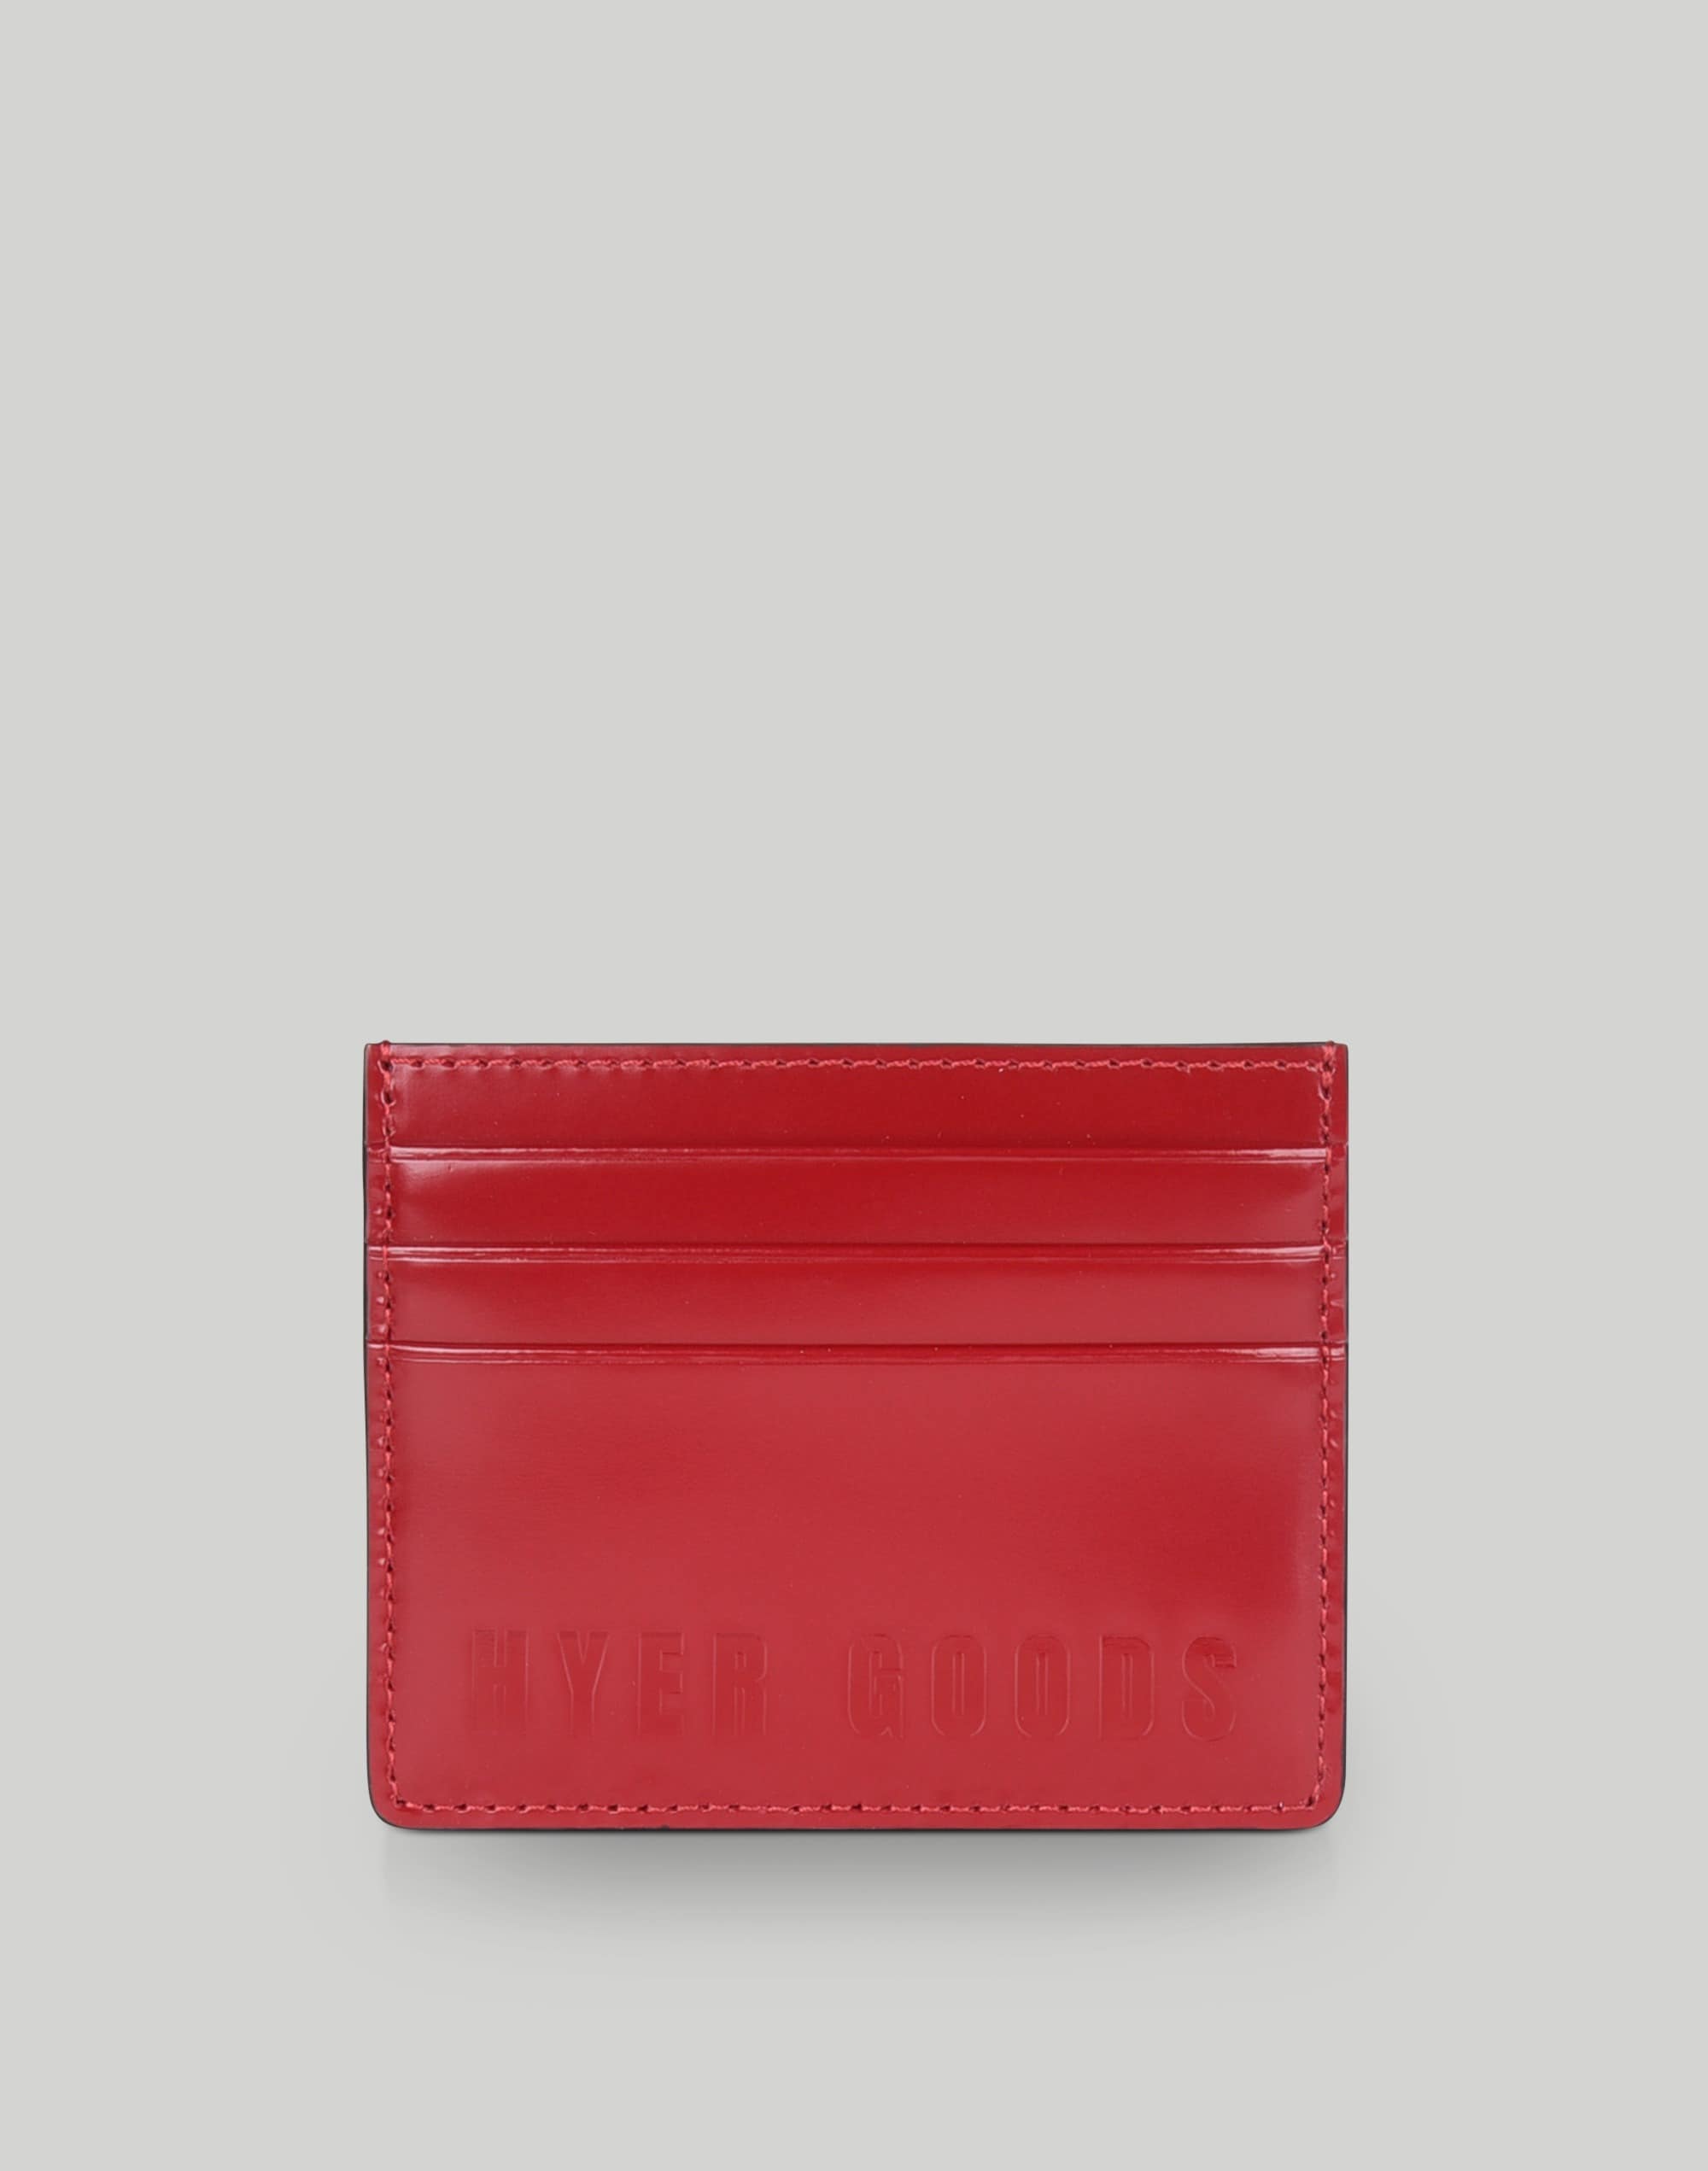 Mw Hyer Goods Luxe Card Wallet In Red